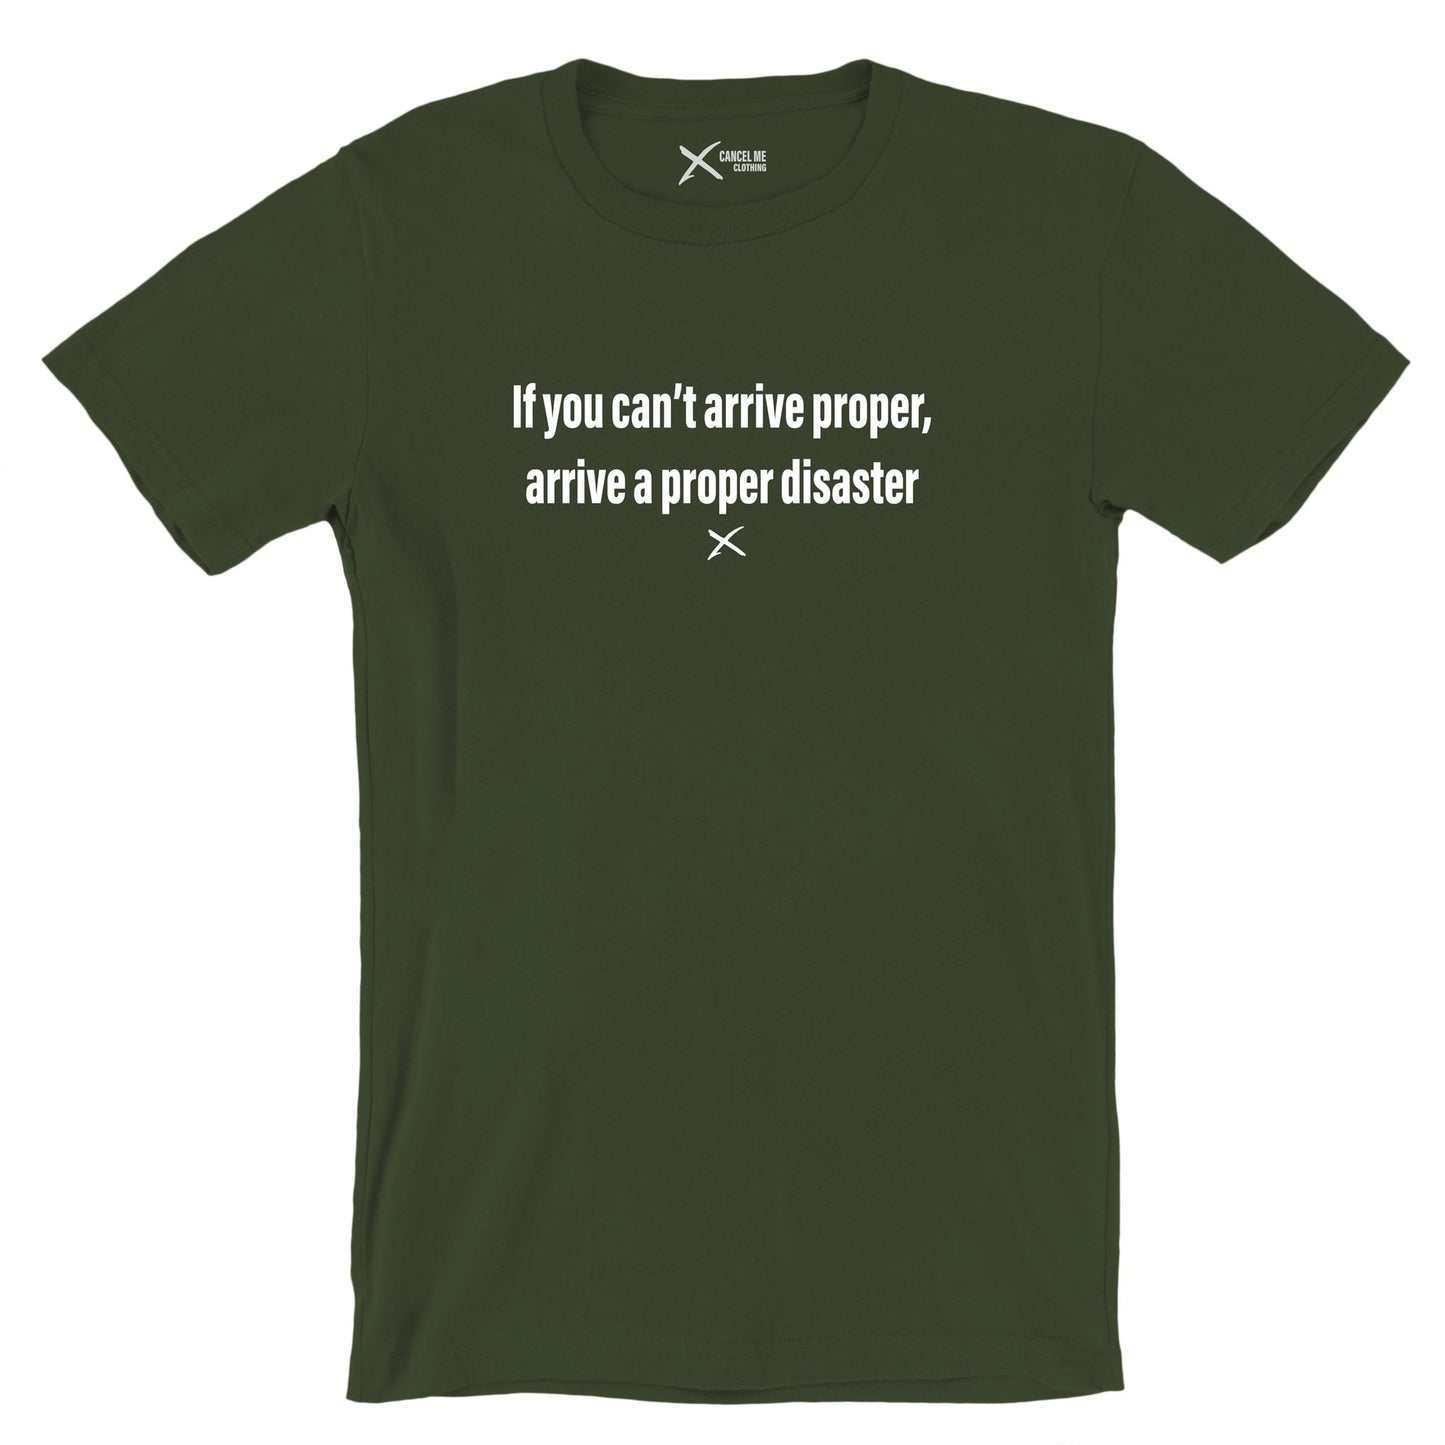 If you can't arrive proper, arrive a proper disaster - Shirt